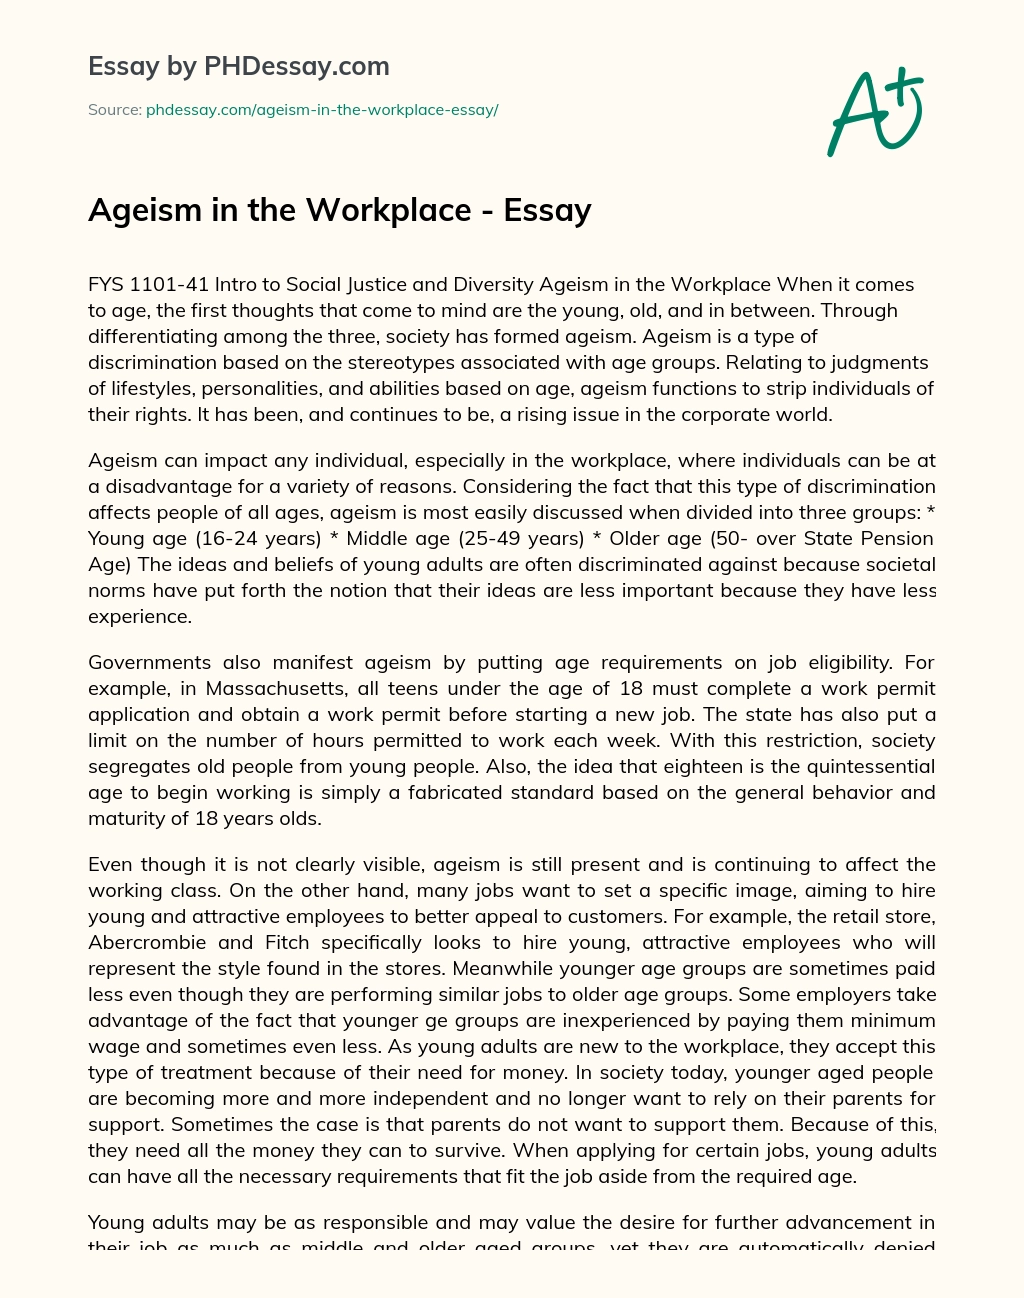 Ageism in the Workplace – Essay essay